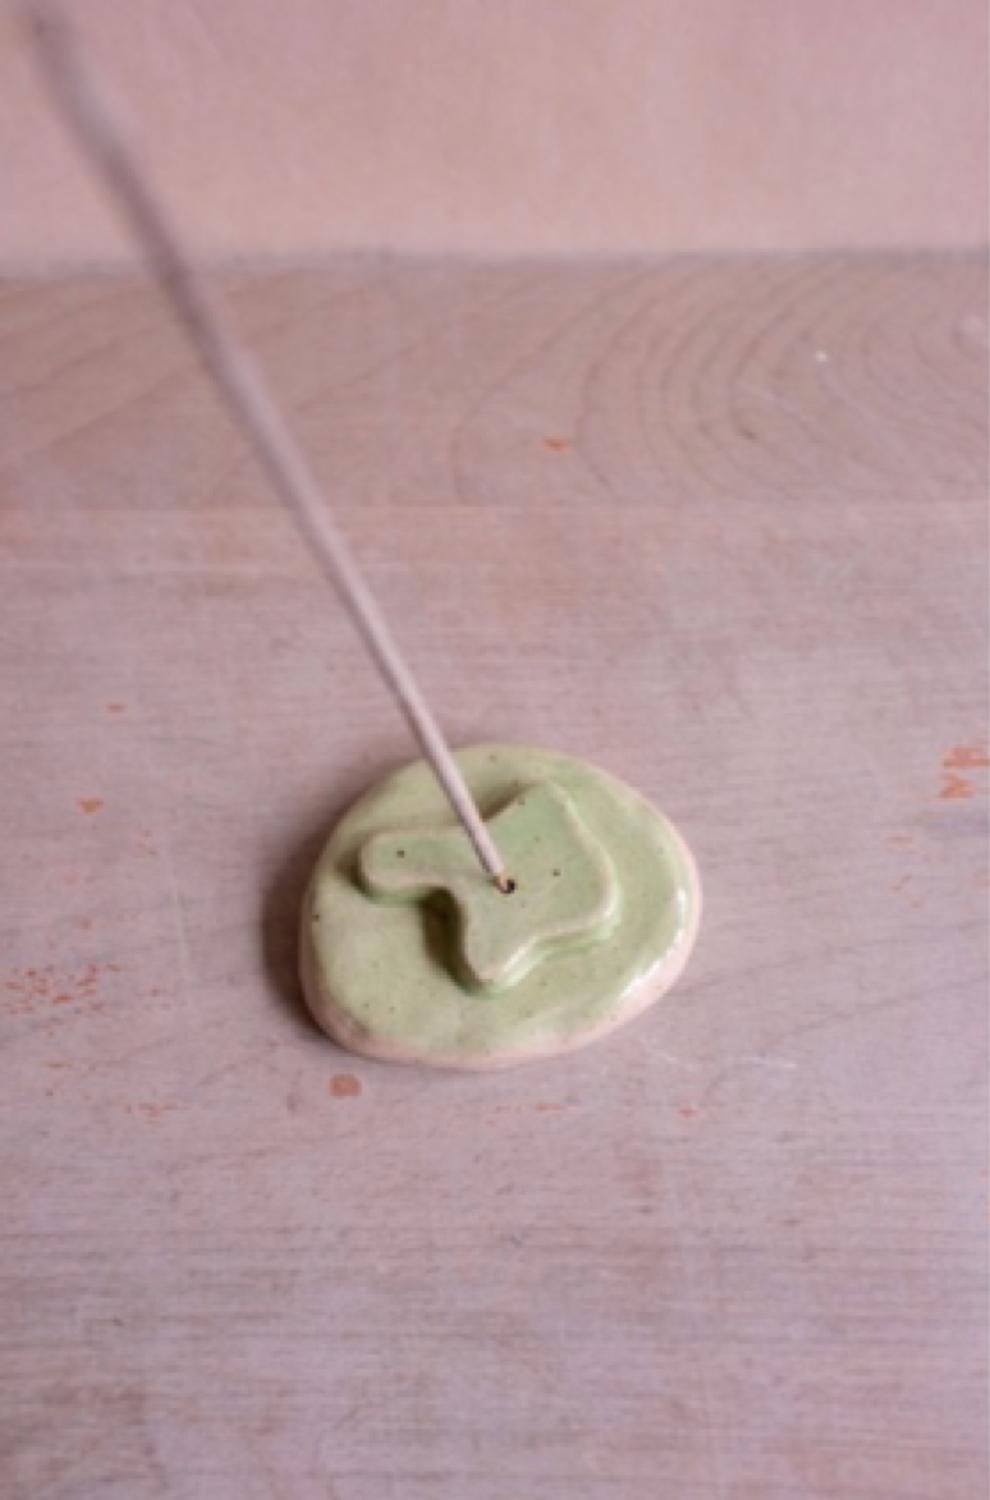 ?Title : Incense holder, stone with shape white speckled clay with pastel green glaze
2021s / Belgium
Size : W 60 D 70 x H 15 mm
Artist : Sigrid Volders


[Sigrid Volders]
Based in Antwerp, Belgium, she works vigorously as a ceramic artist,